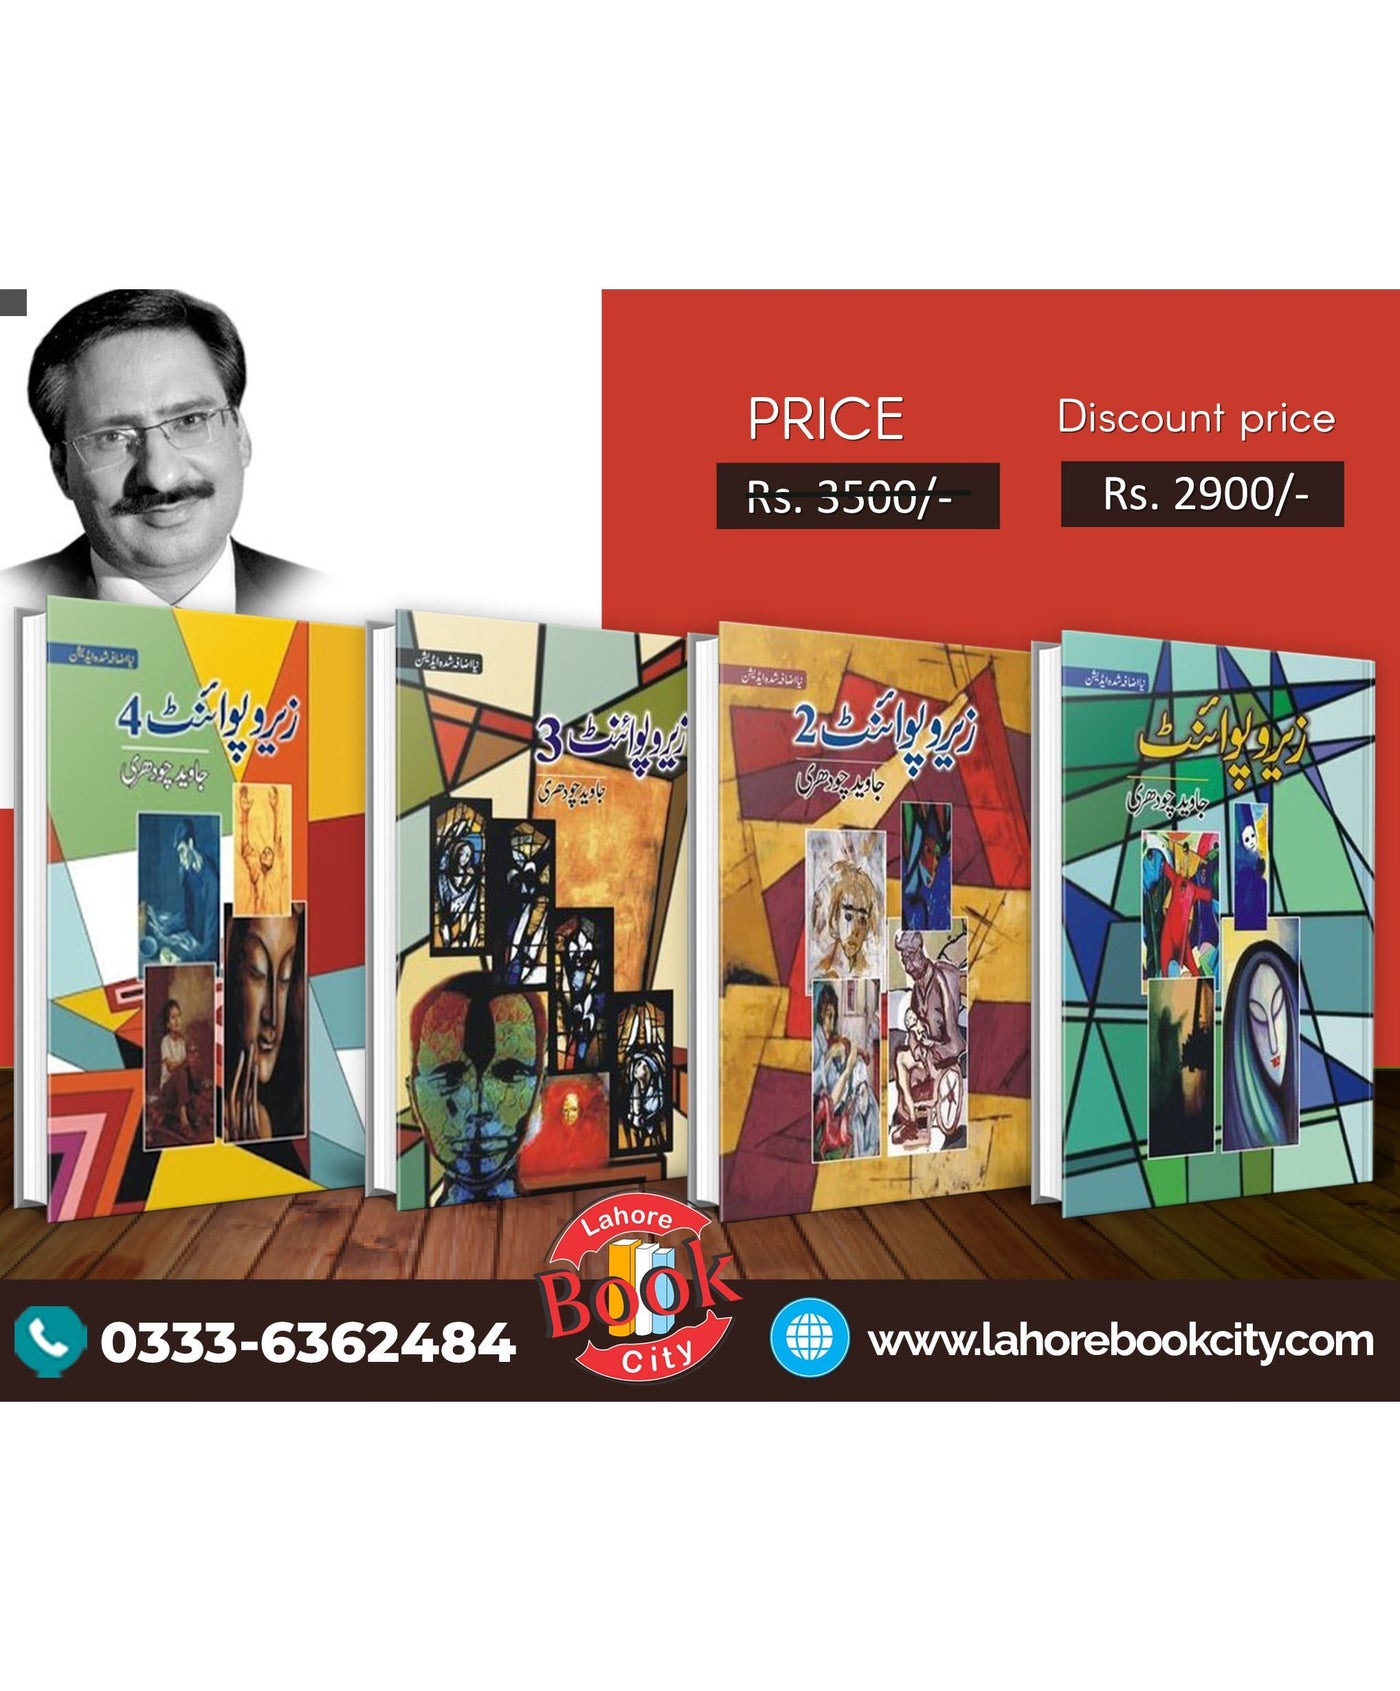 javed ch 4 books deal set